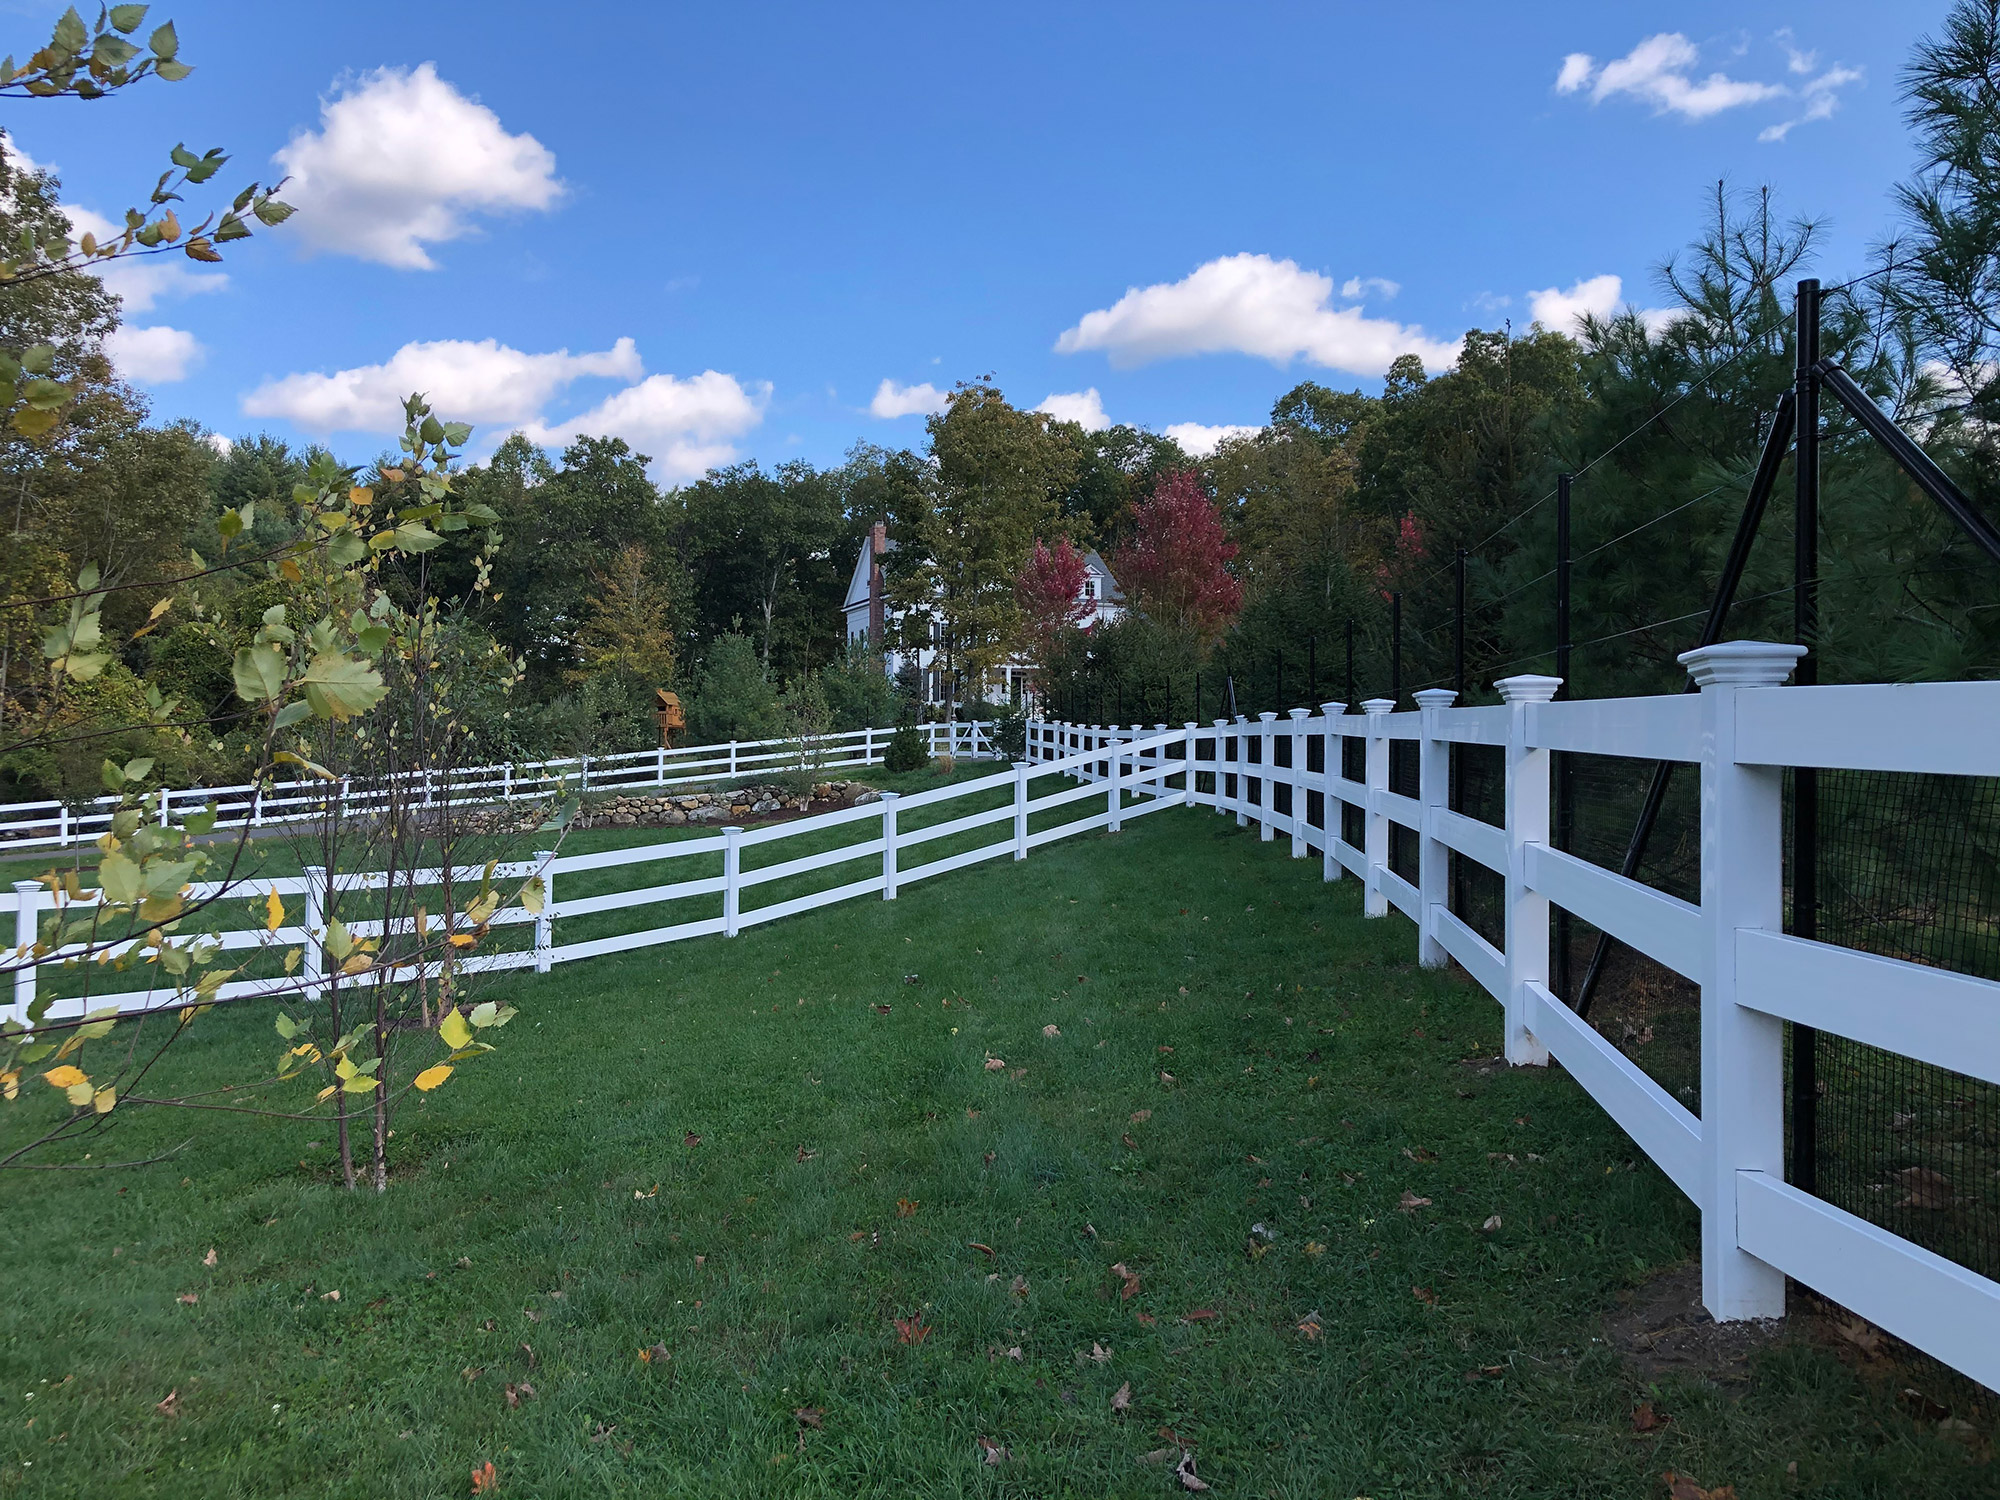 A white fence in a grassy field, perfect for split rail fencing.